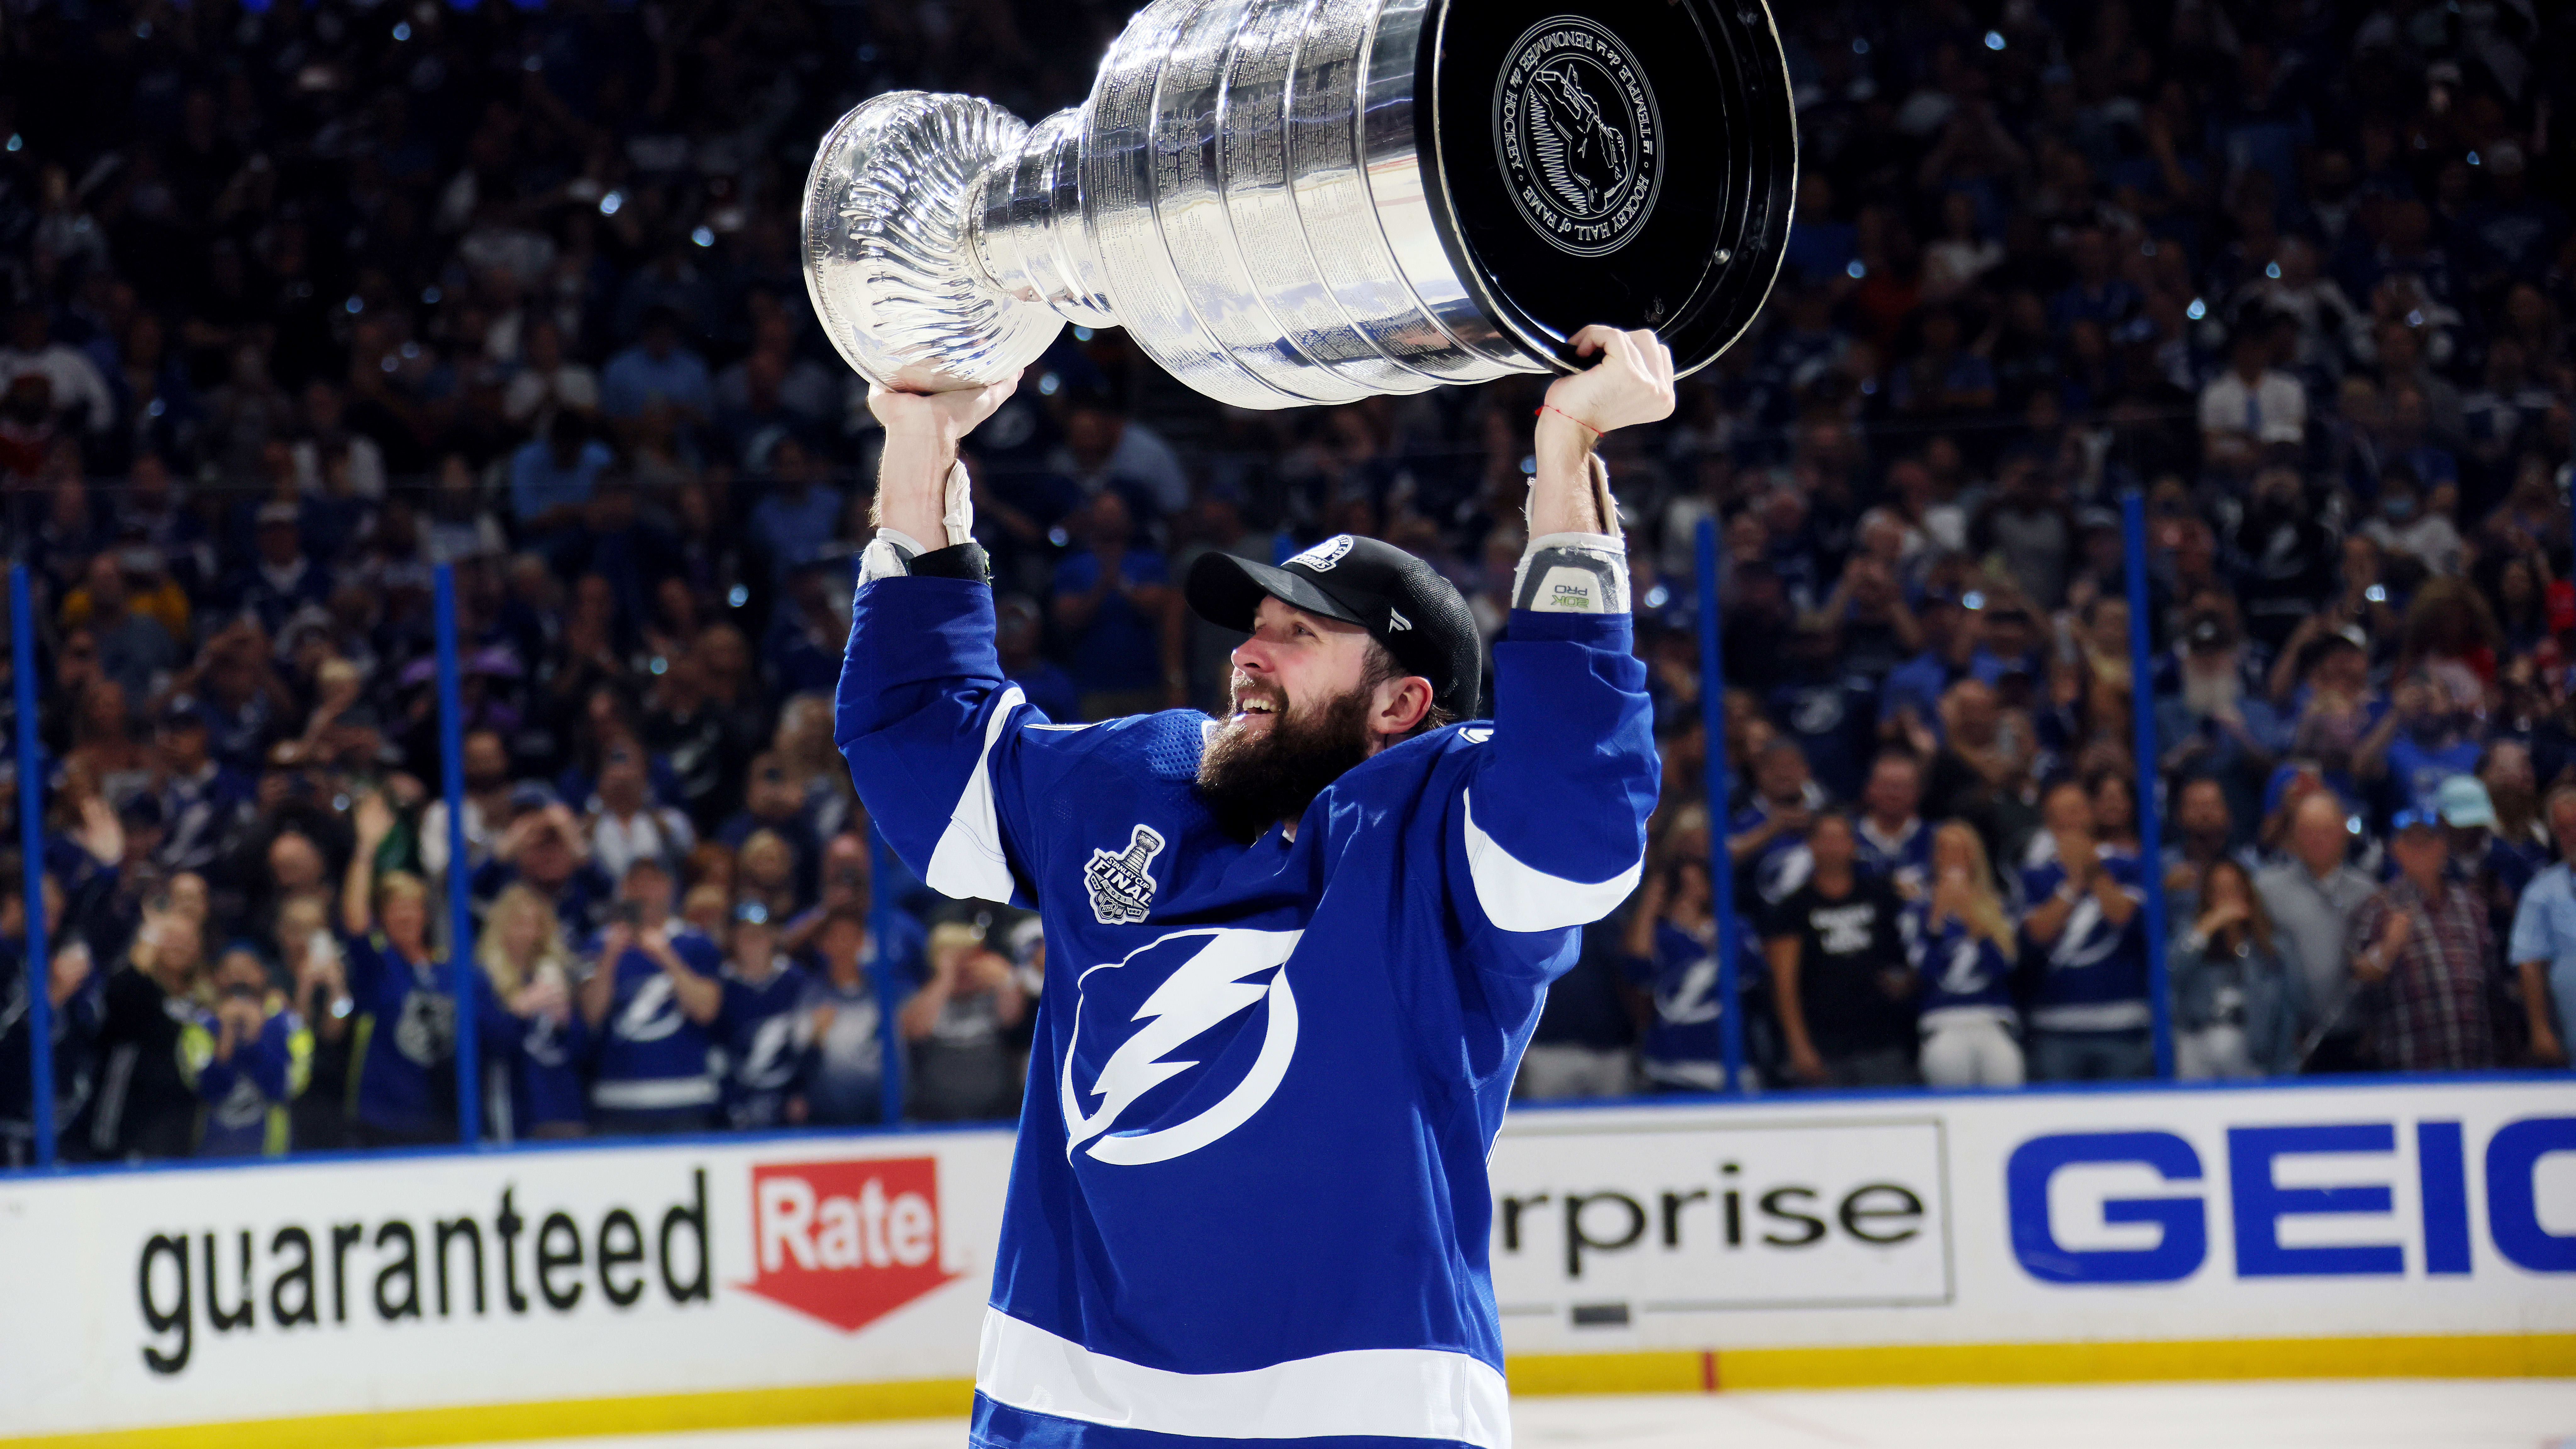 https://www.fanduel.com/research/theduel/images/duel/2021-NHL-Stanley-Cup-Final---Game-Five-5941e1f0ef2f3ad928743ca4d05b0f3d.jpg